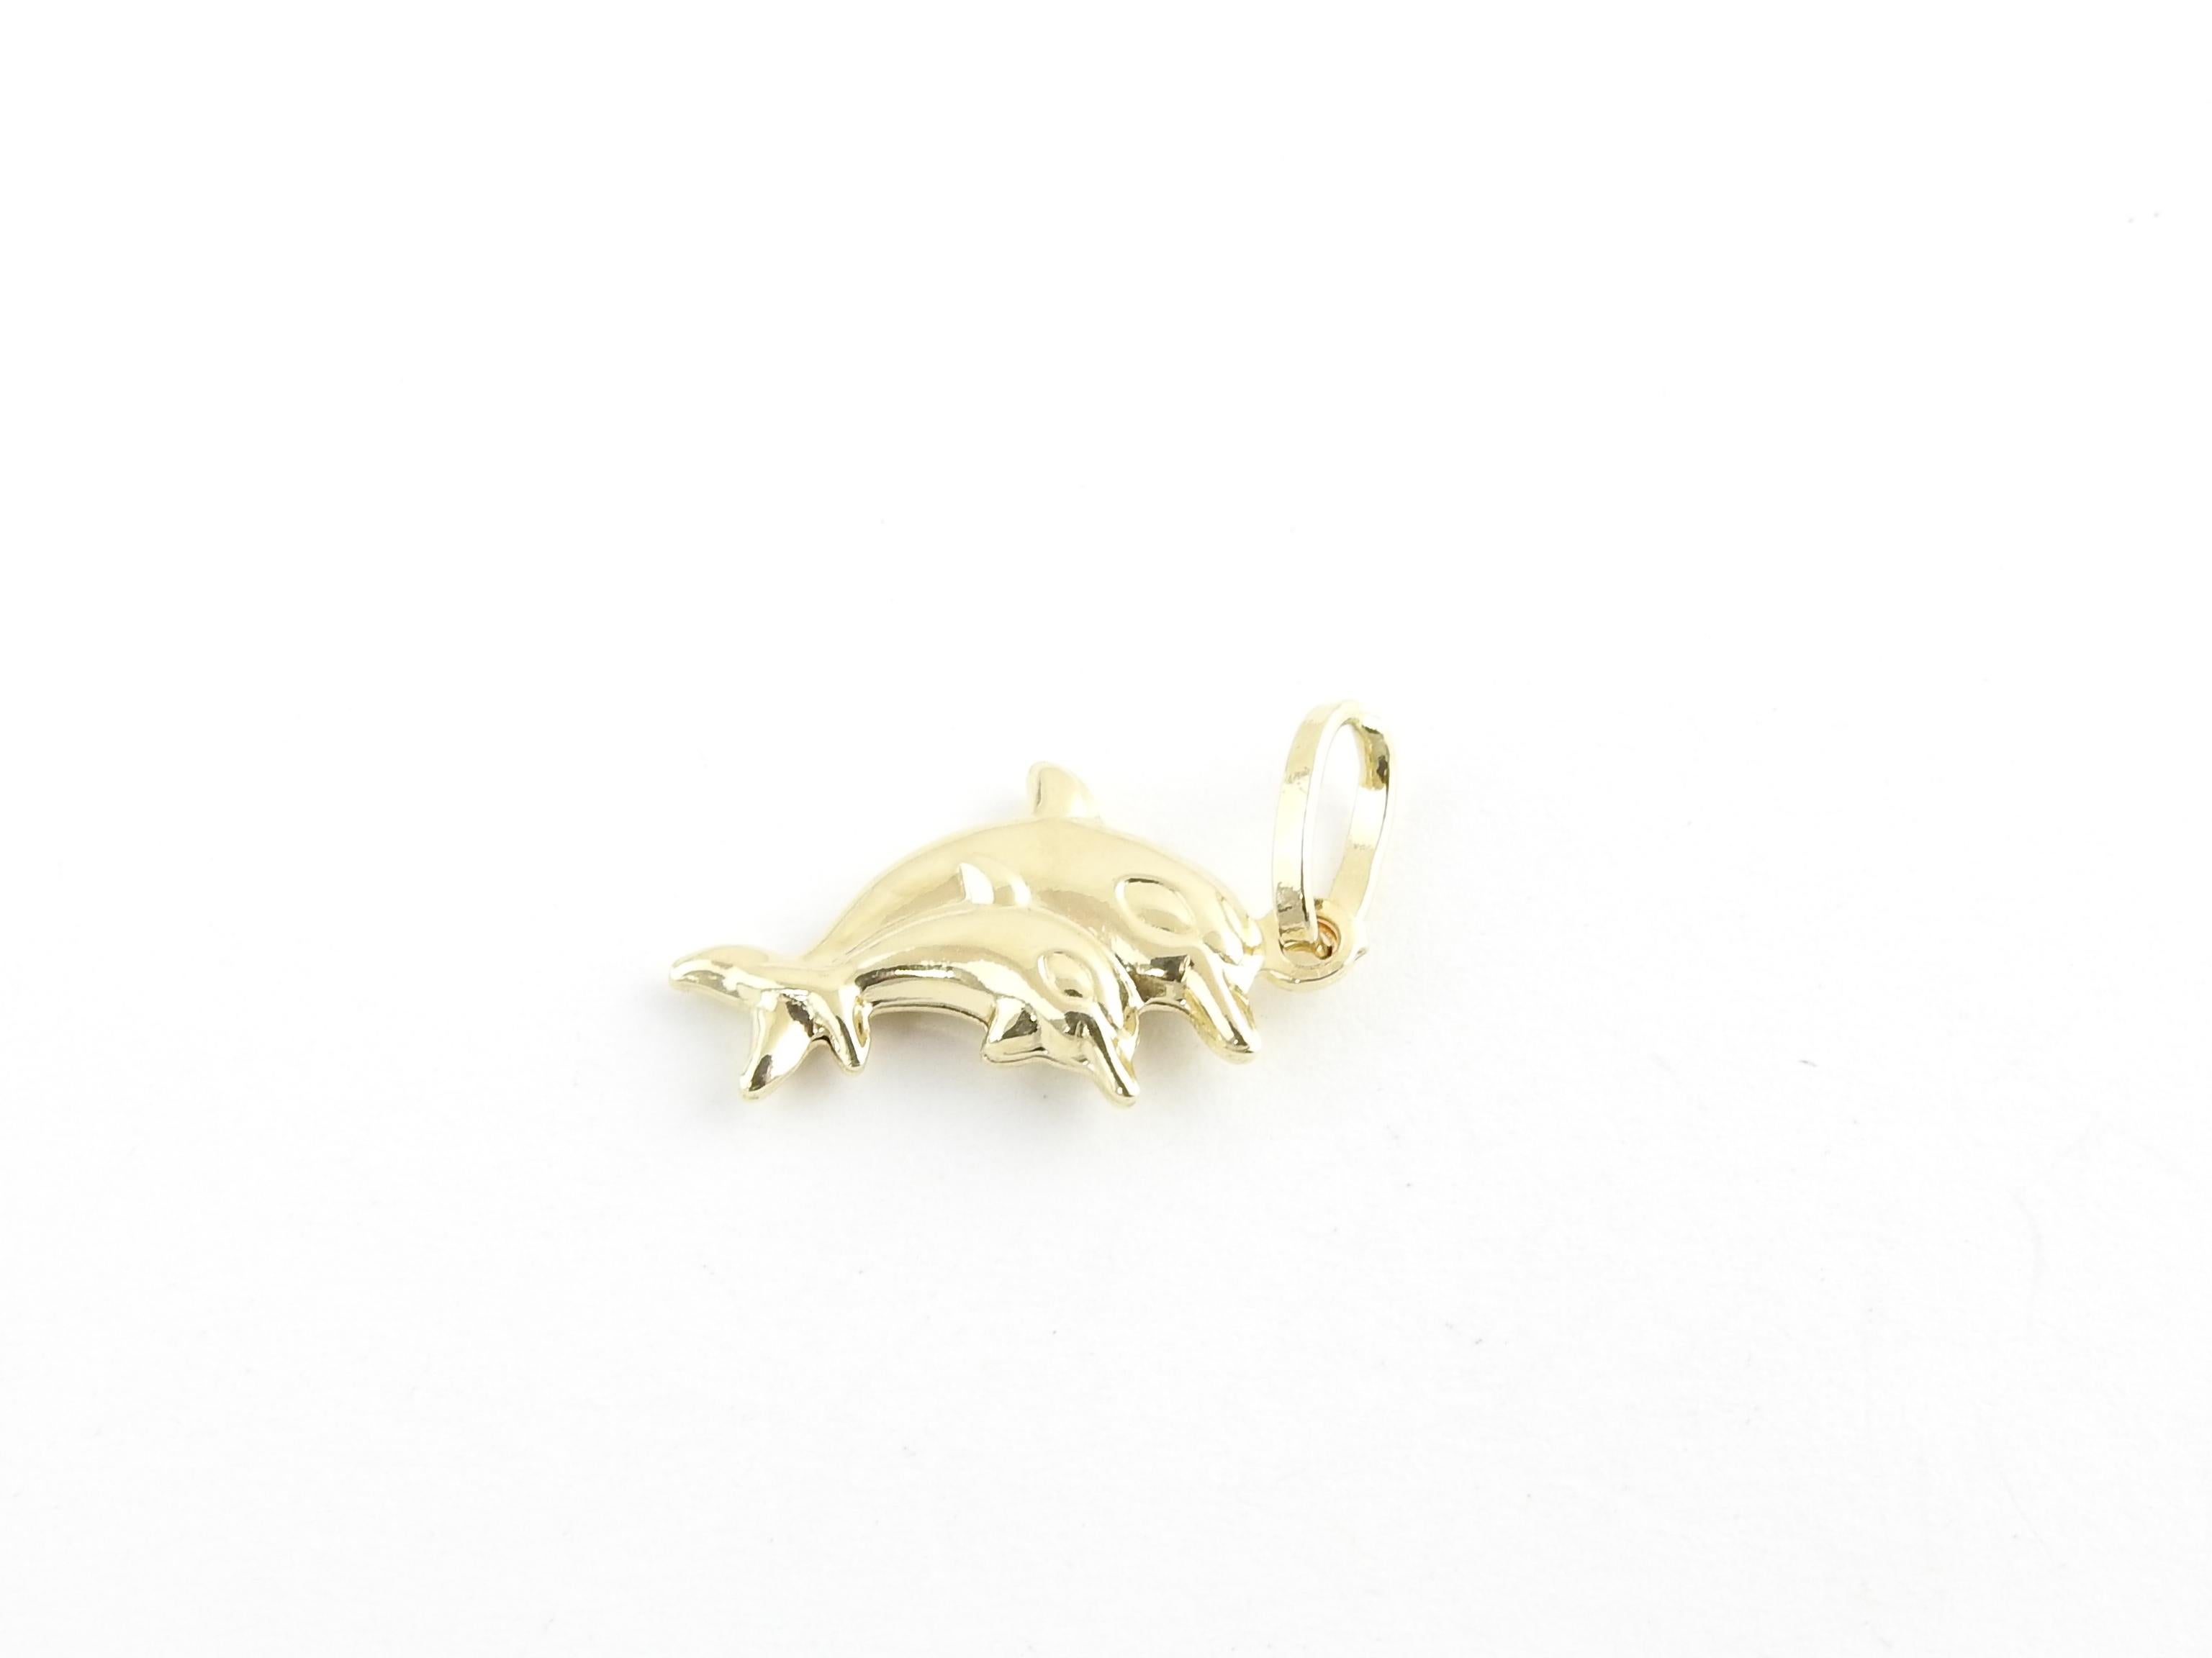 Vintage 14 Karat Yellow Gold Dolphin Charm

Known as the protectors of the sea, dolphins represent joy and harmony!

This lovely charm features two dolphins beautifully detailed in 14K yellow gold.

Size: 17 mm x 11 mm (actual charm)

Weight: 0.5